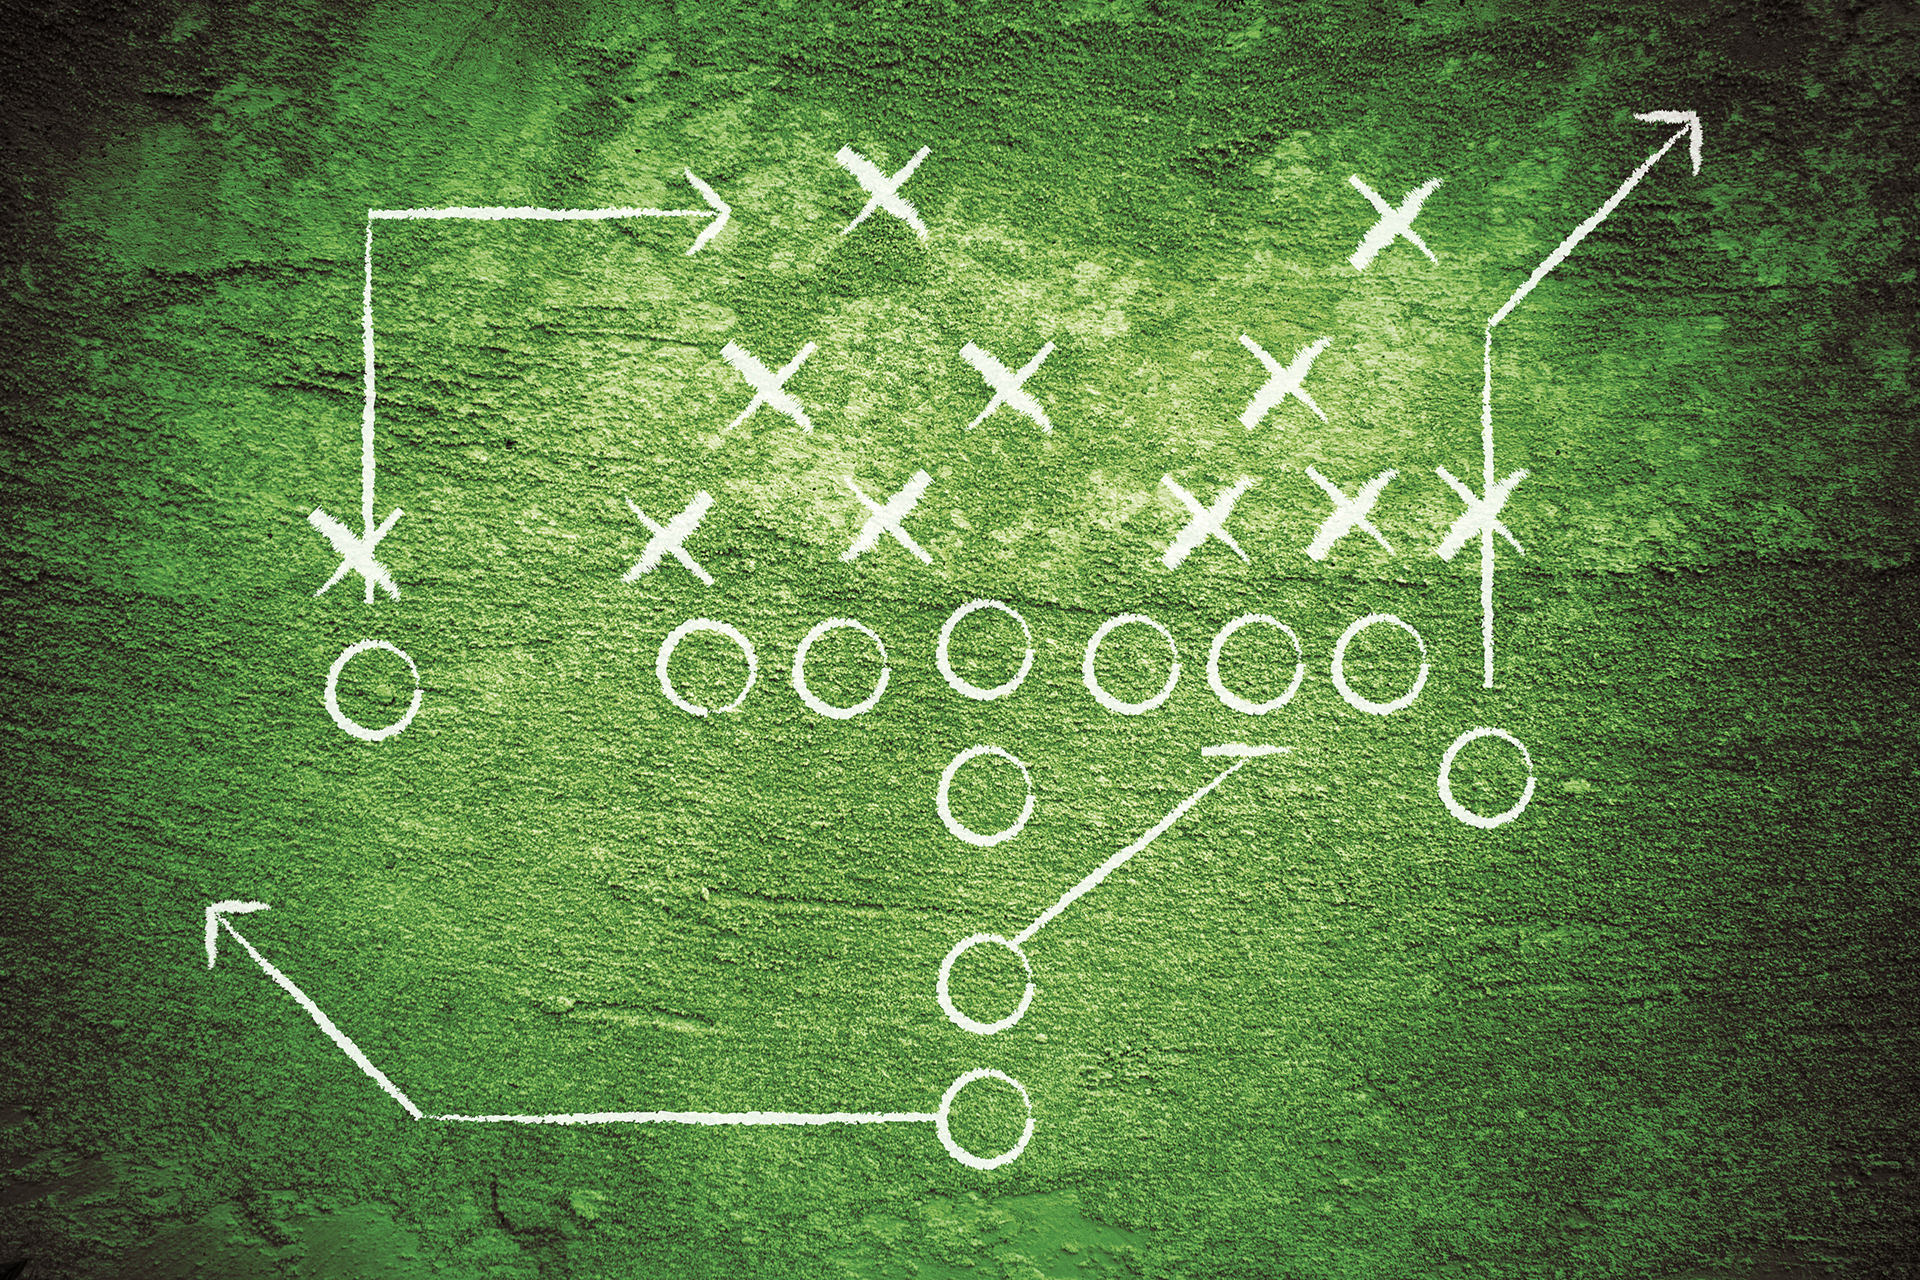 Media interviews are like a game of football, and you need a game plan to be prepared. This is your media interview playbook.